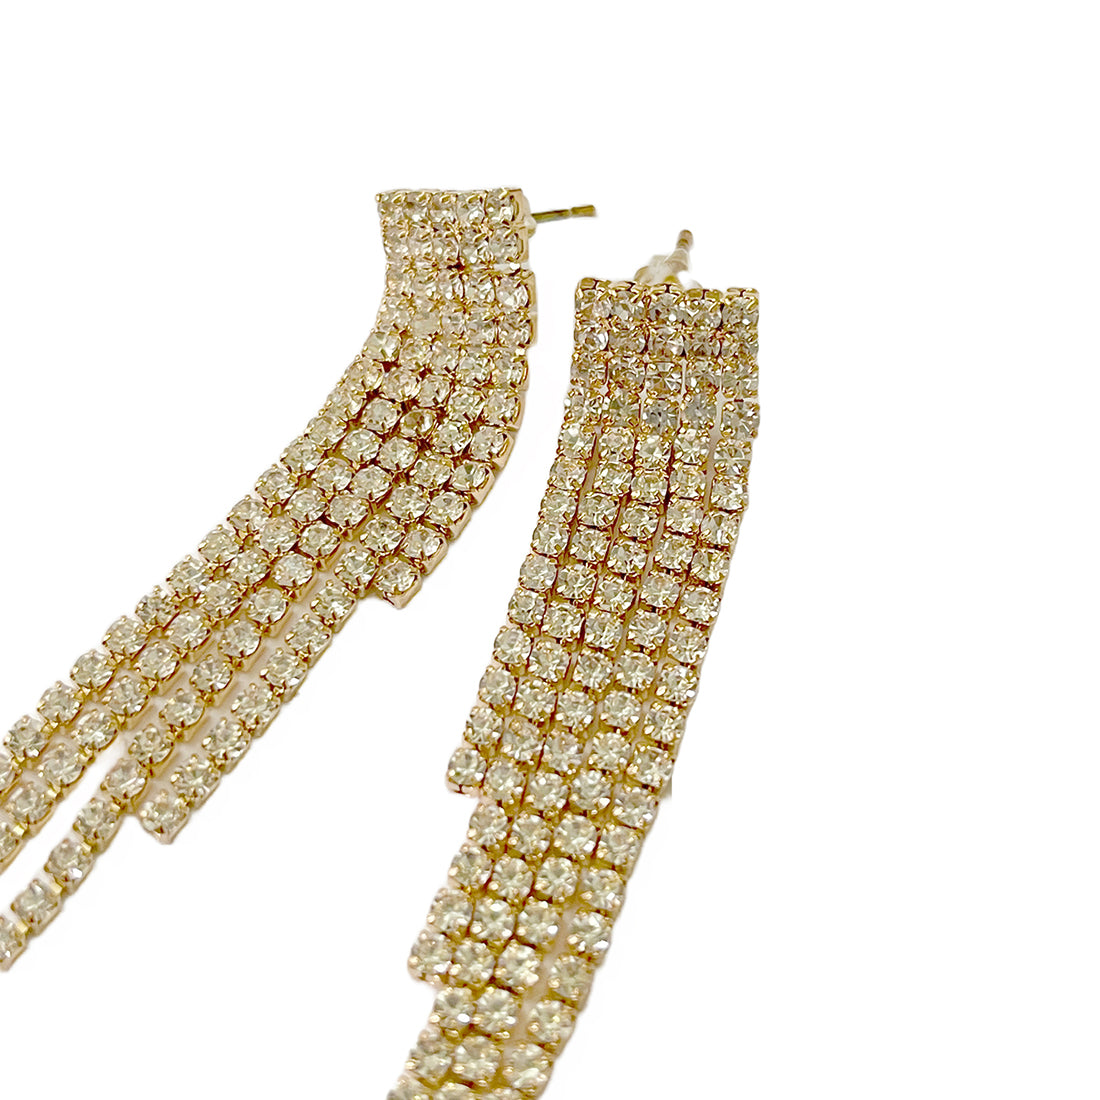 Ayesha Contemporary White Diamante Crystal Studded Gold-Toned Long Asymmetric Tassel Drop Earrings